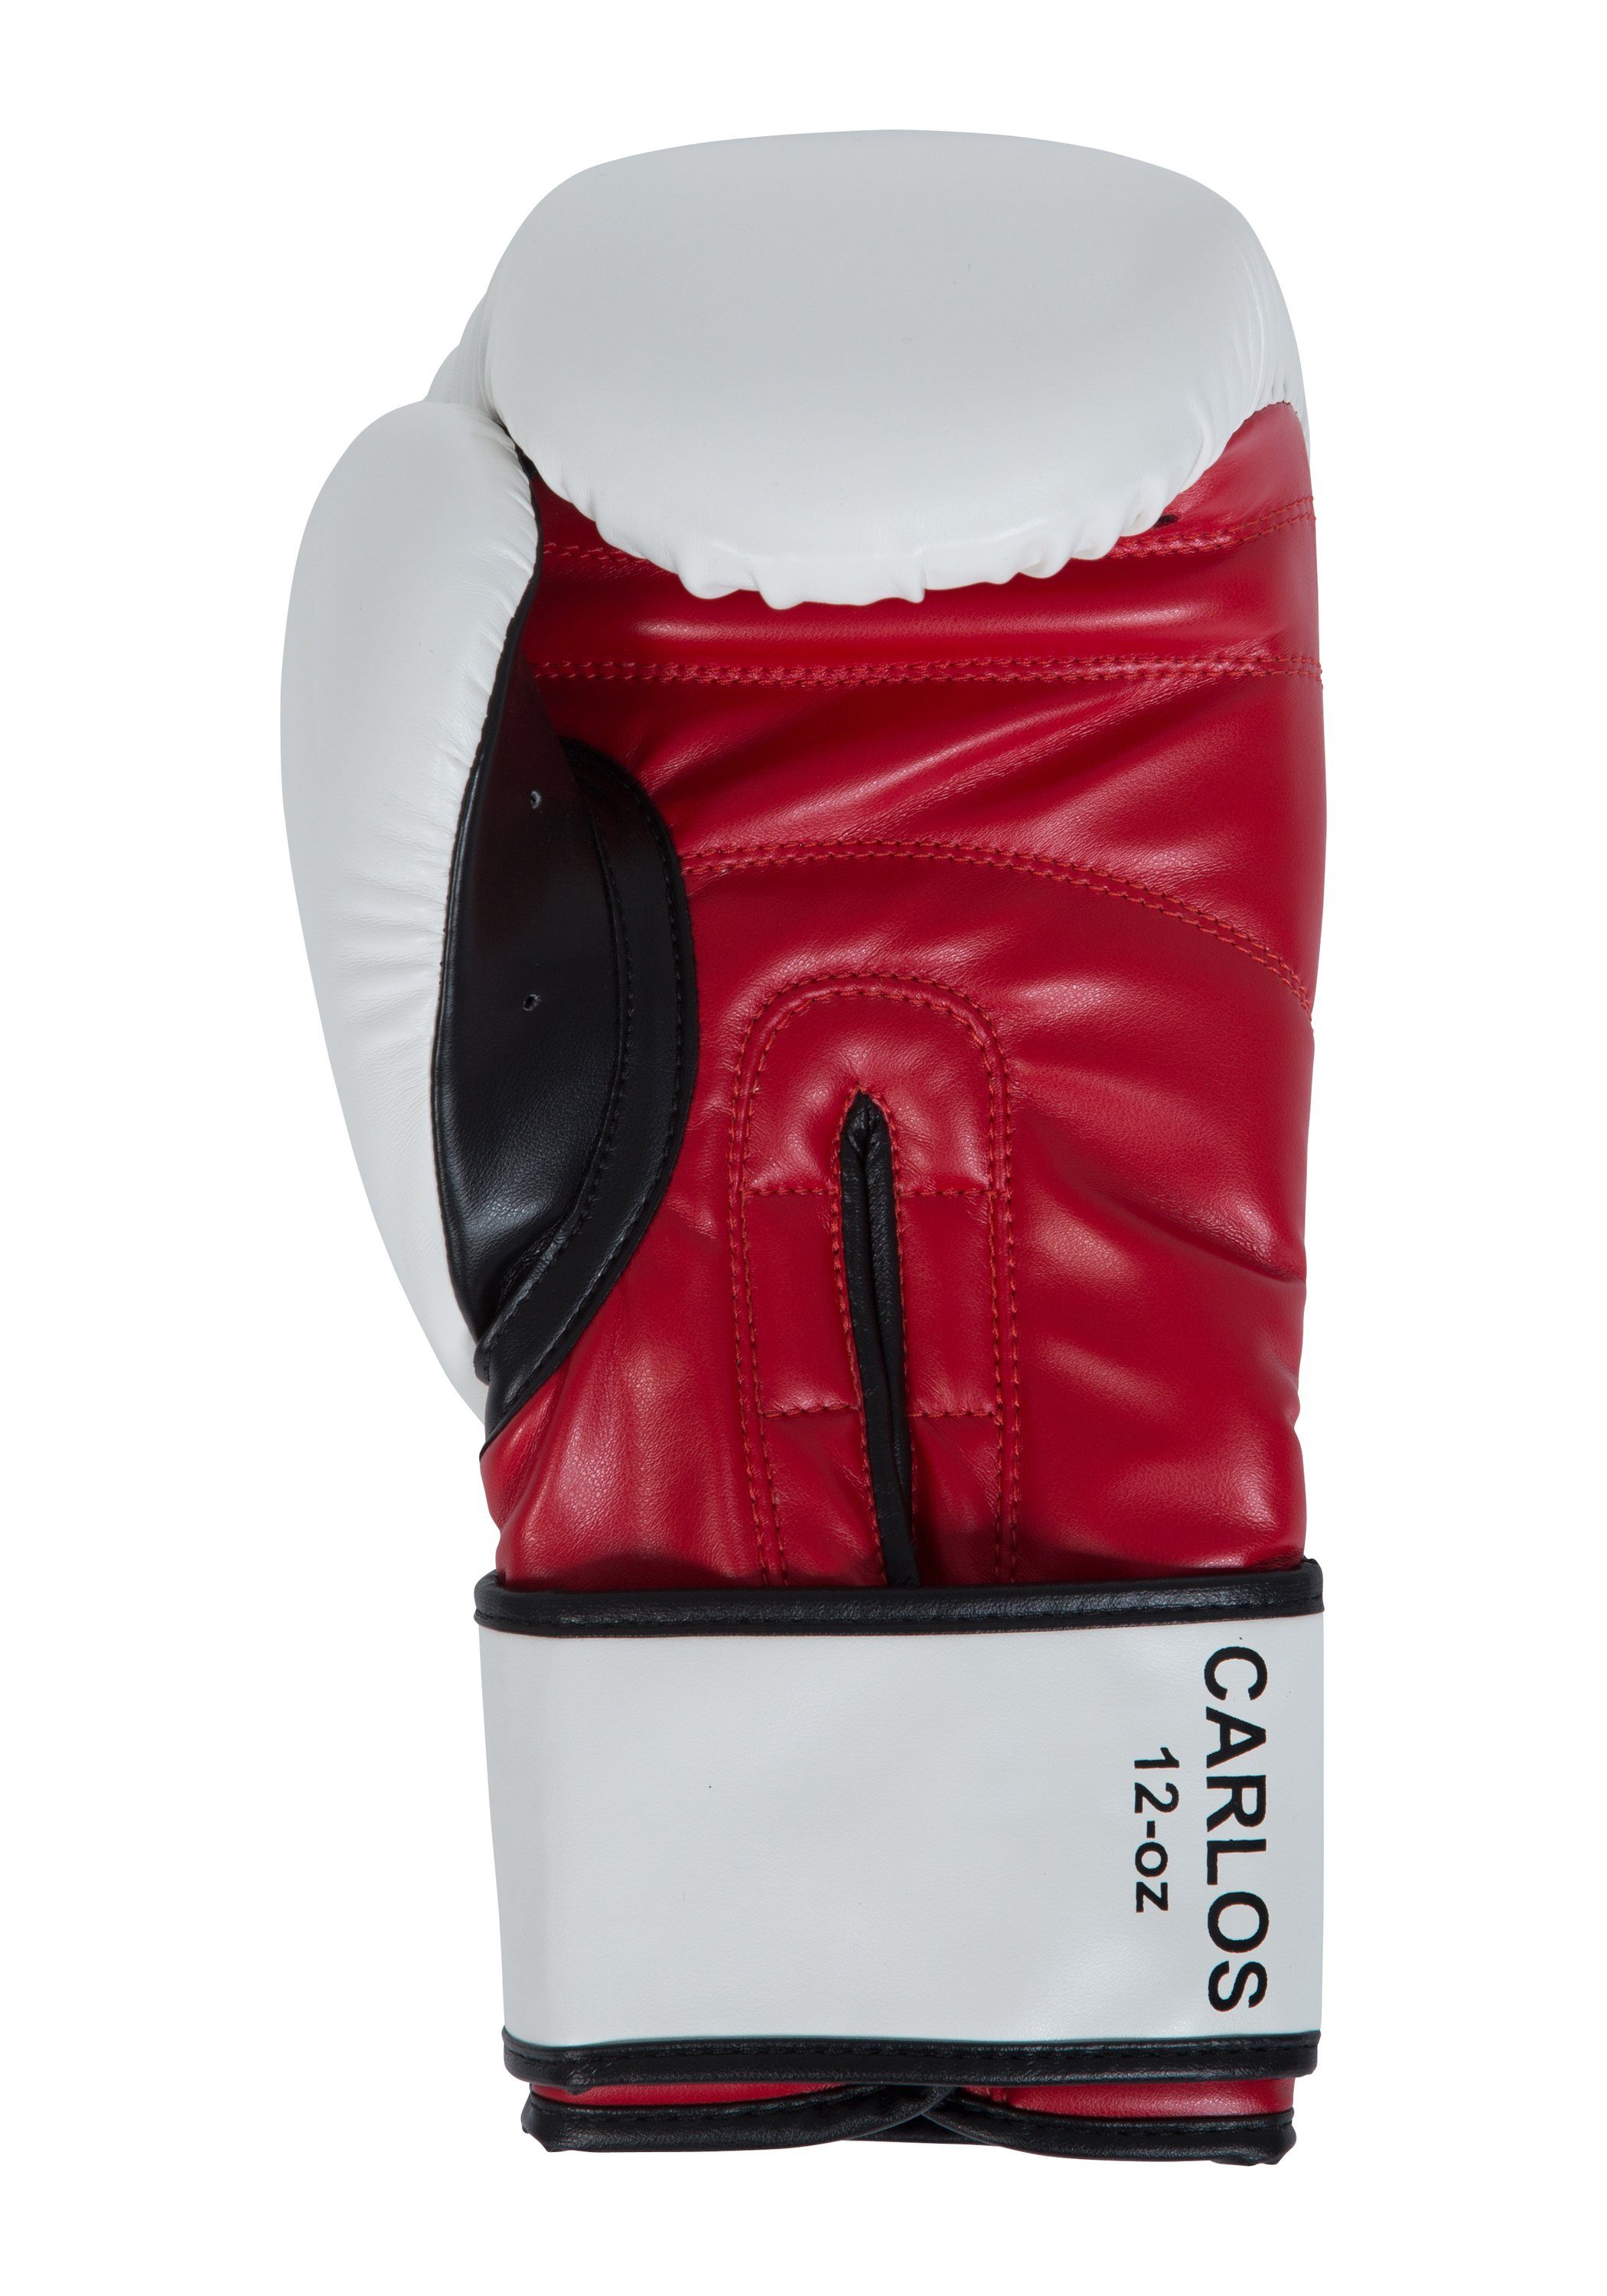 Benlee CARLOS White/Black/Red Boxhandschuhe Marciano Rocky